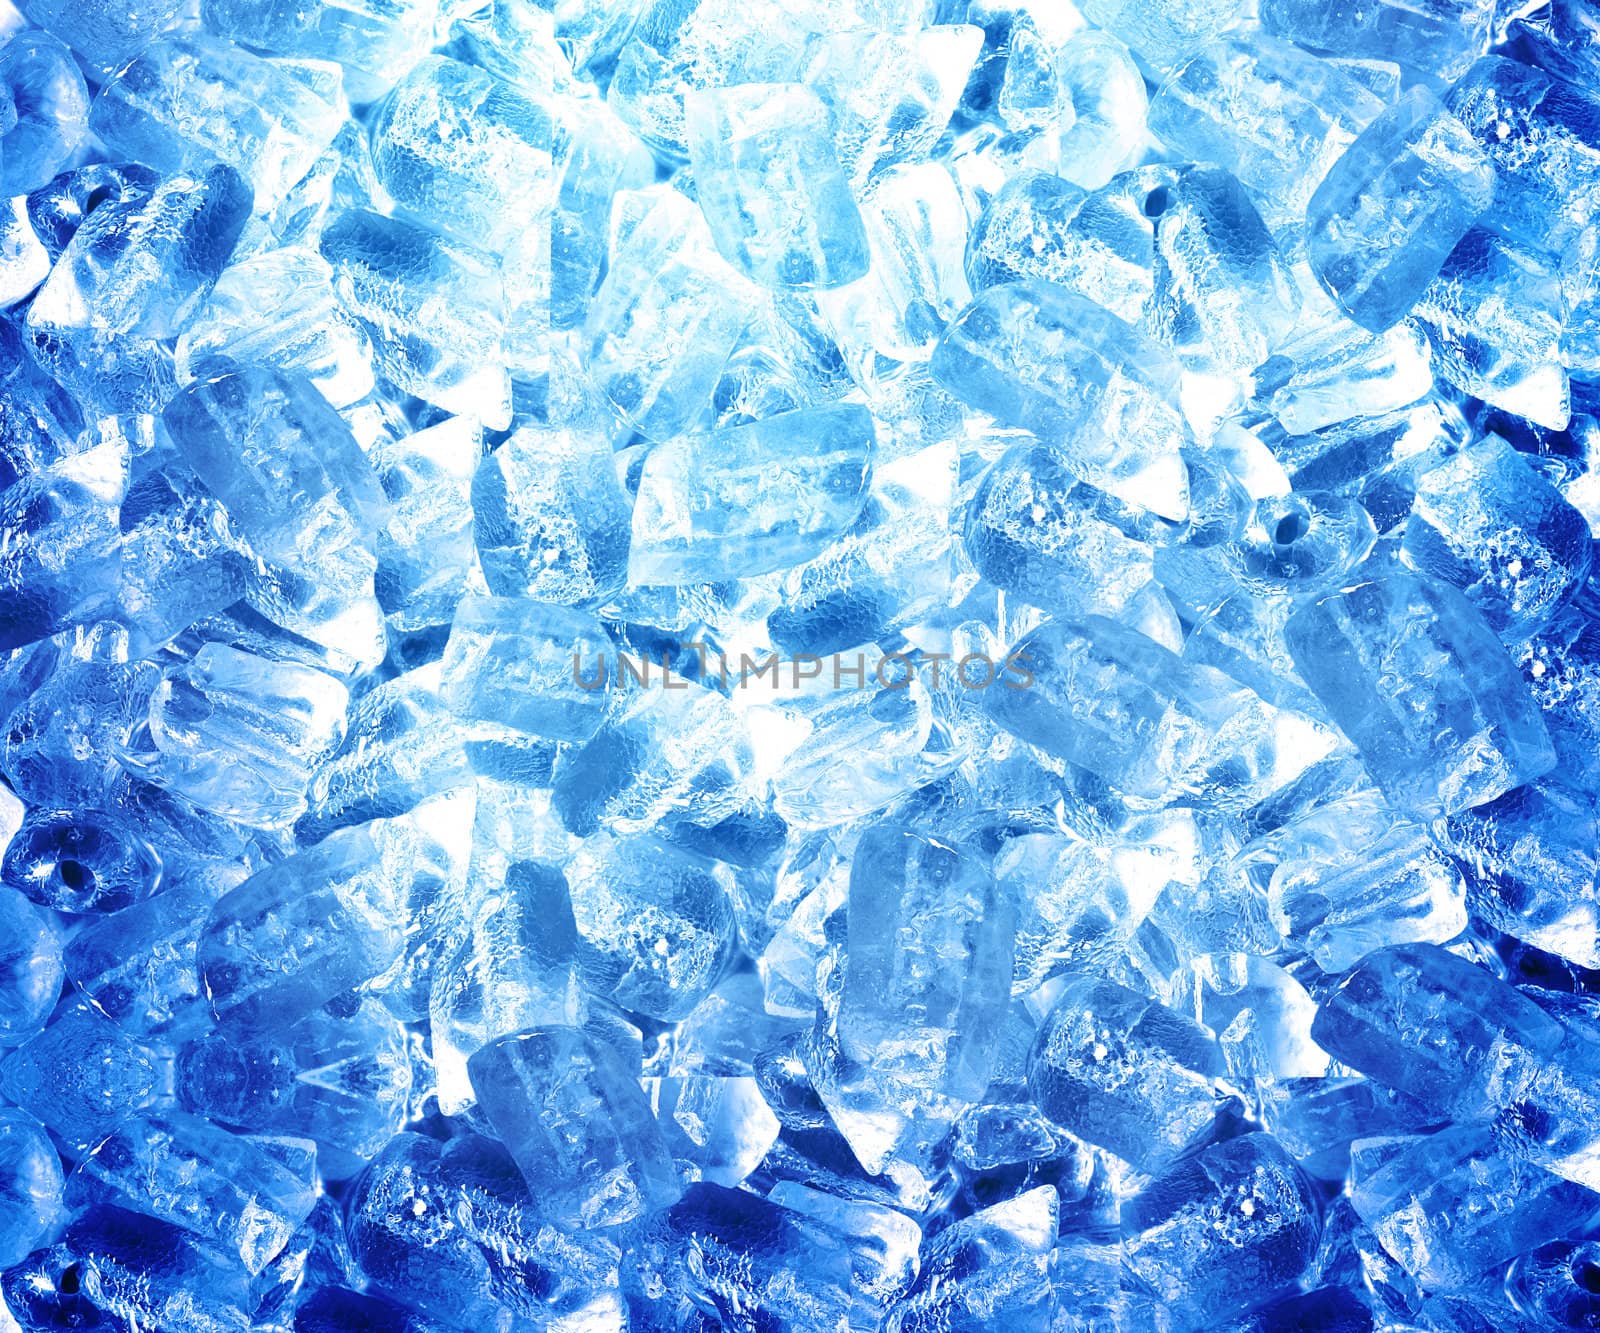 Background of blue ice cubes